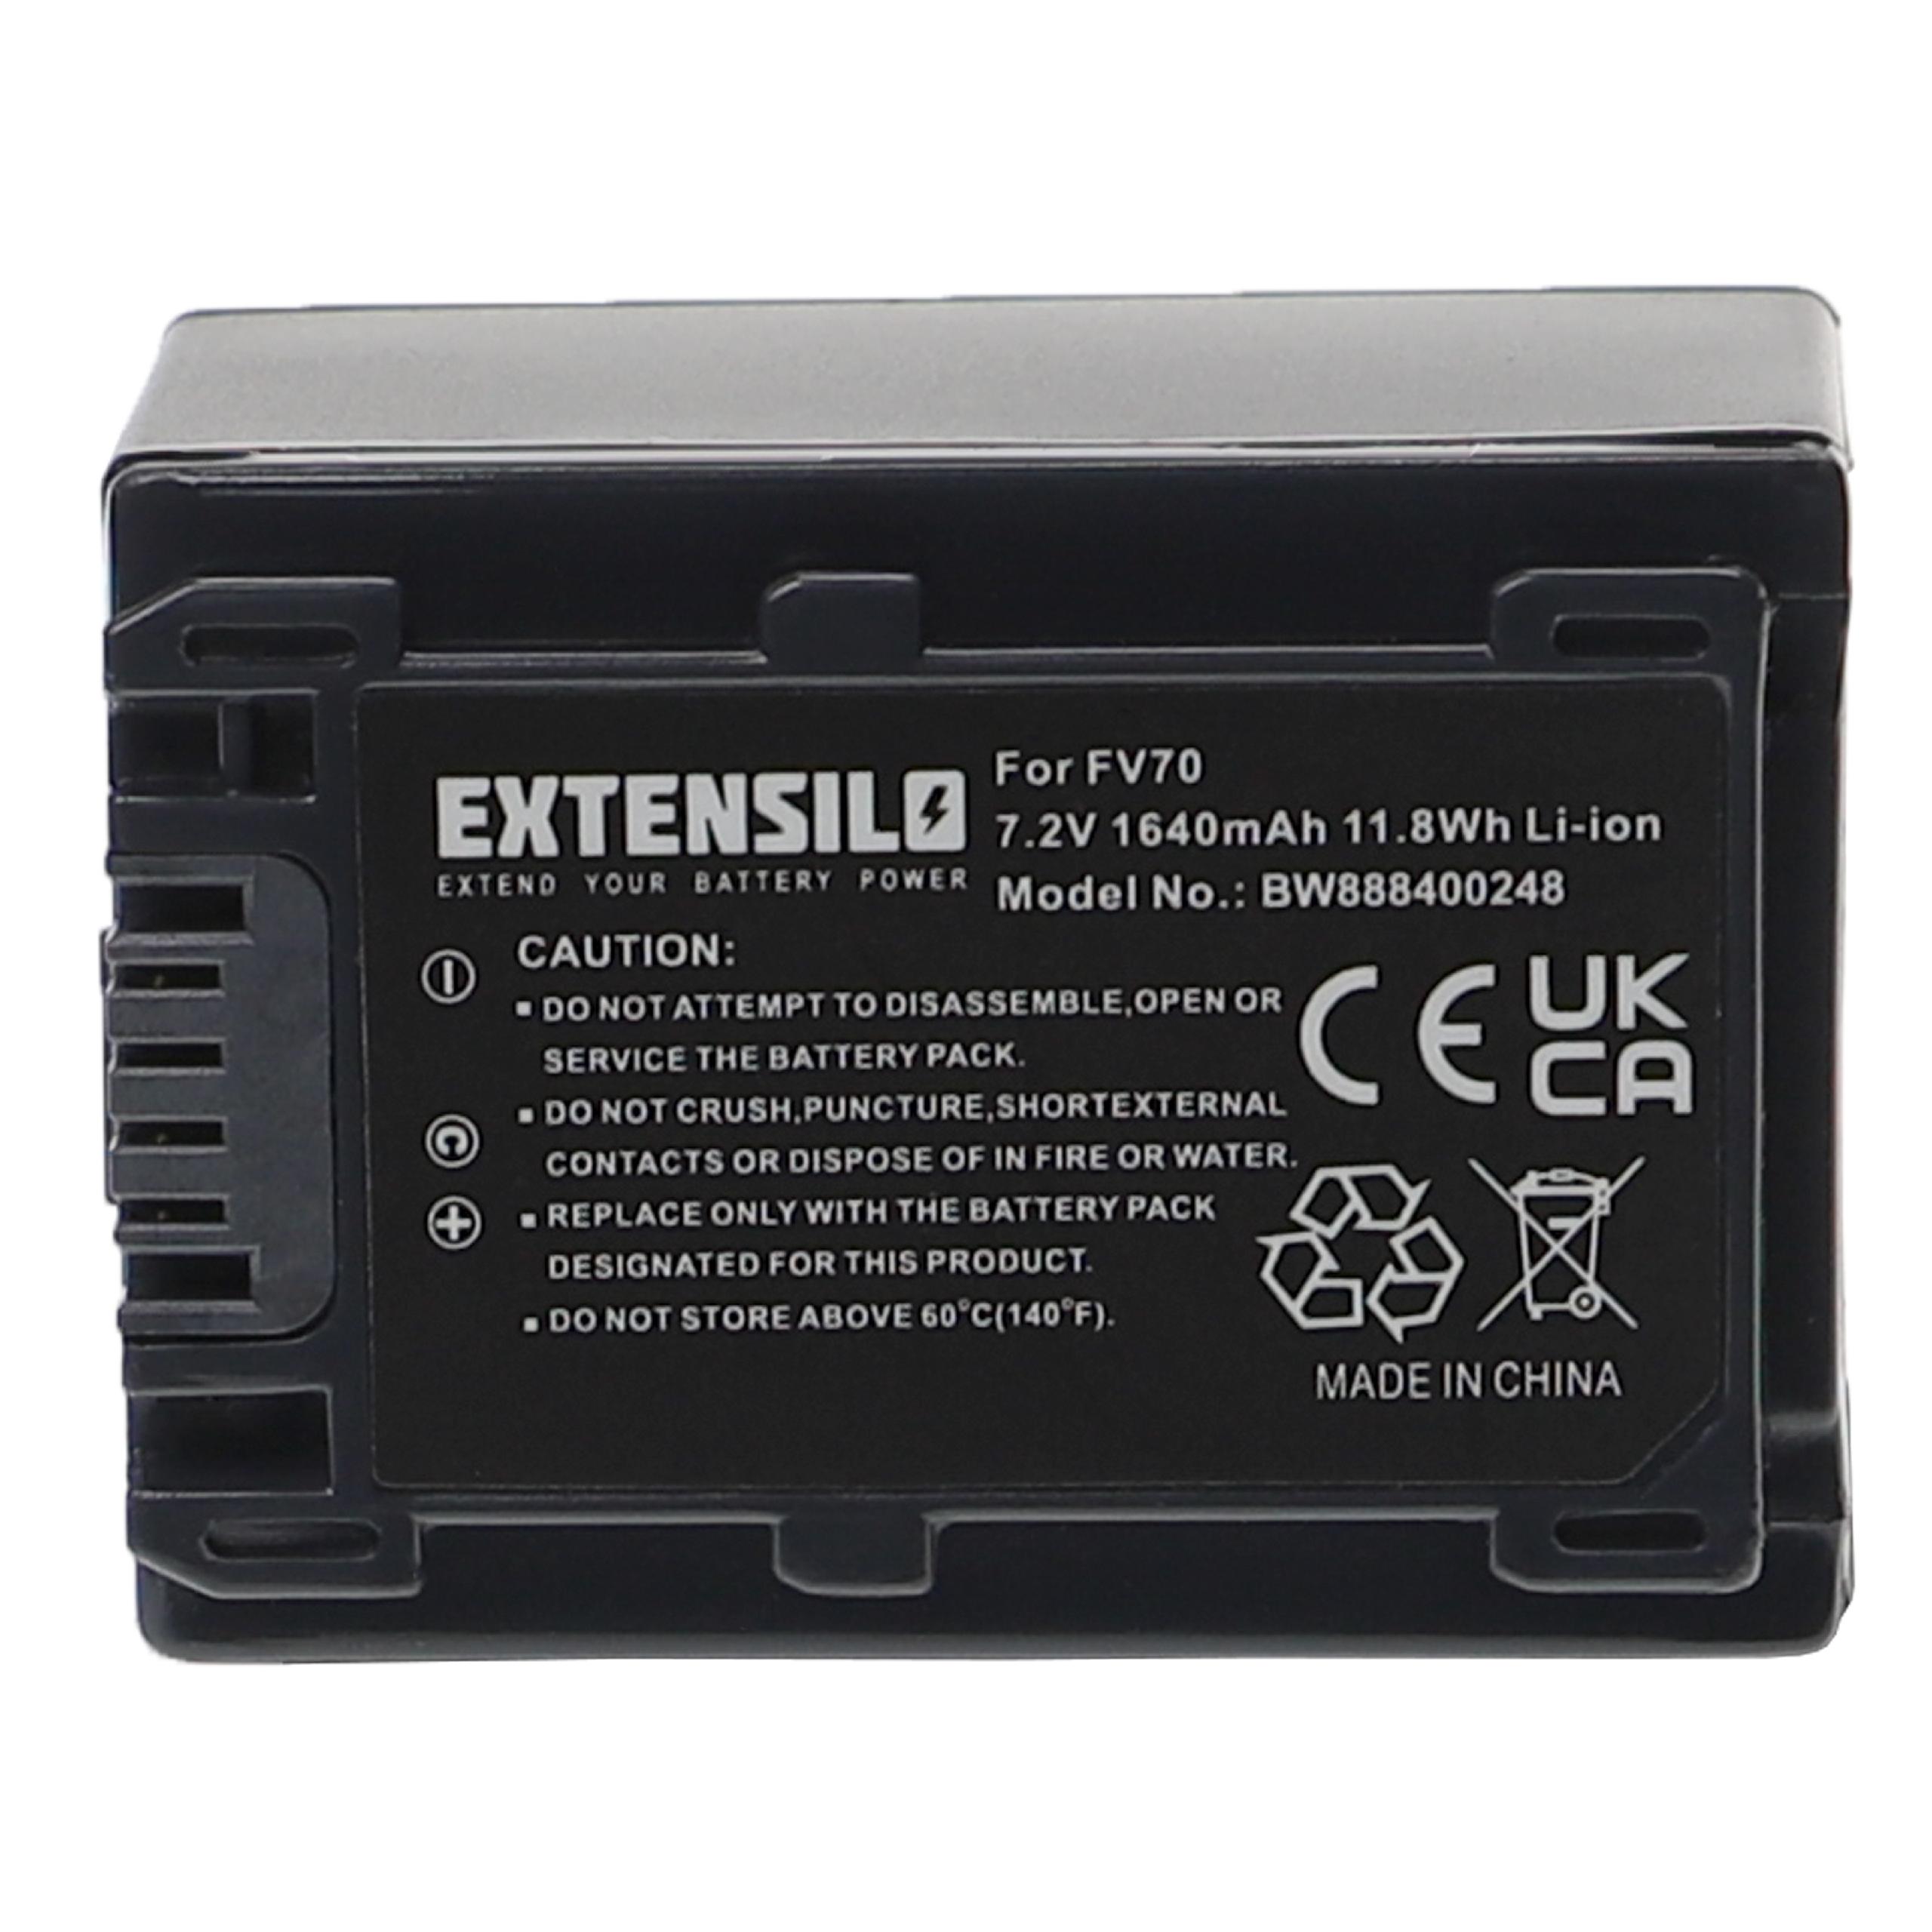 Battery Replacement for Sony NP-FH100, NP-FH50, NP-FV70, NP-FV50, NP-FH71, NP-FV100 - 1640mAh, 7.2V, Li-Ion